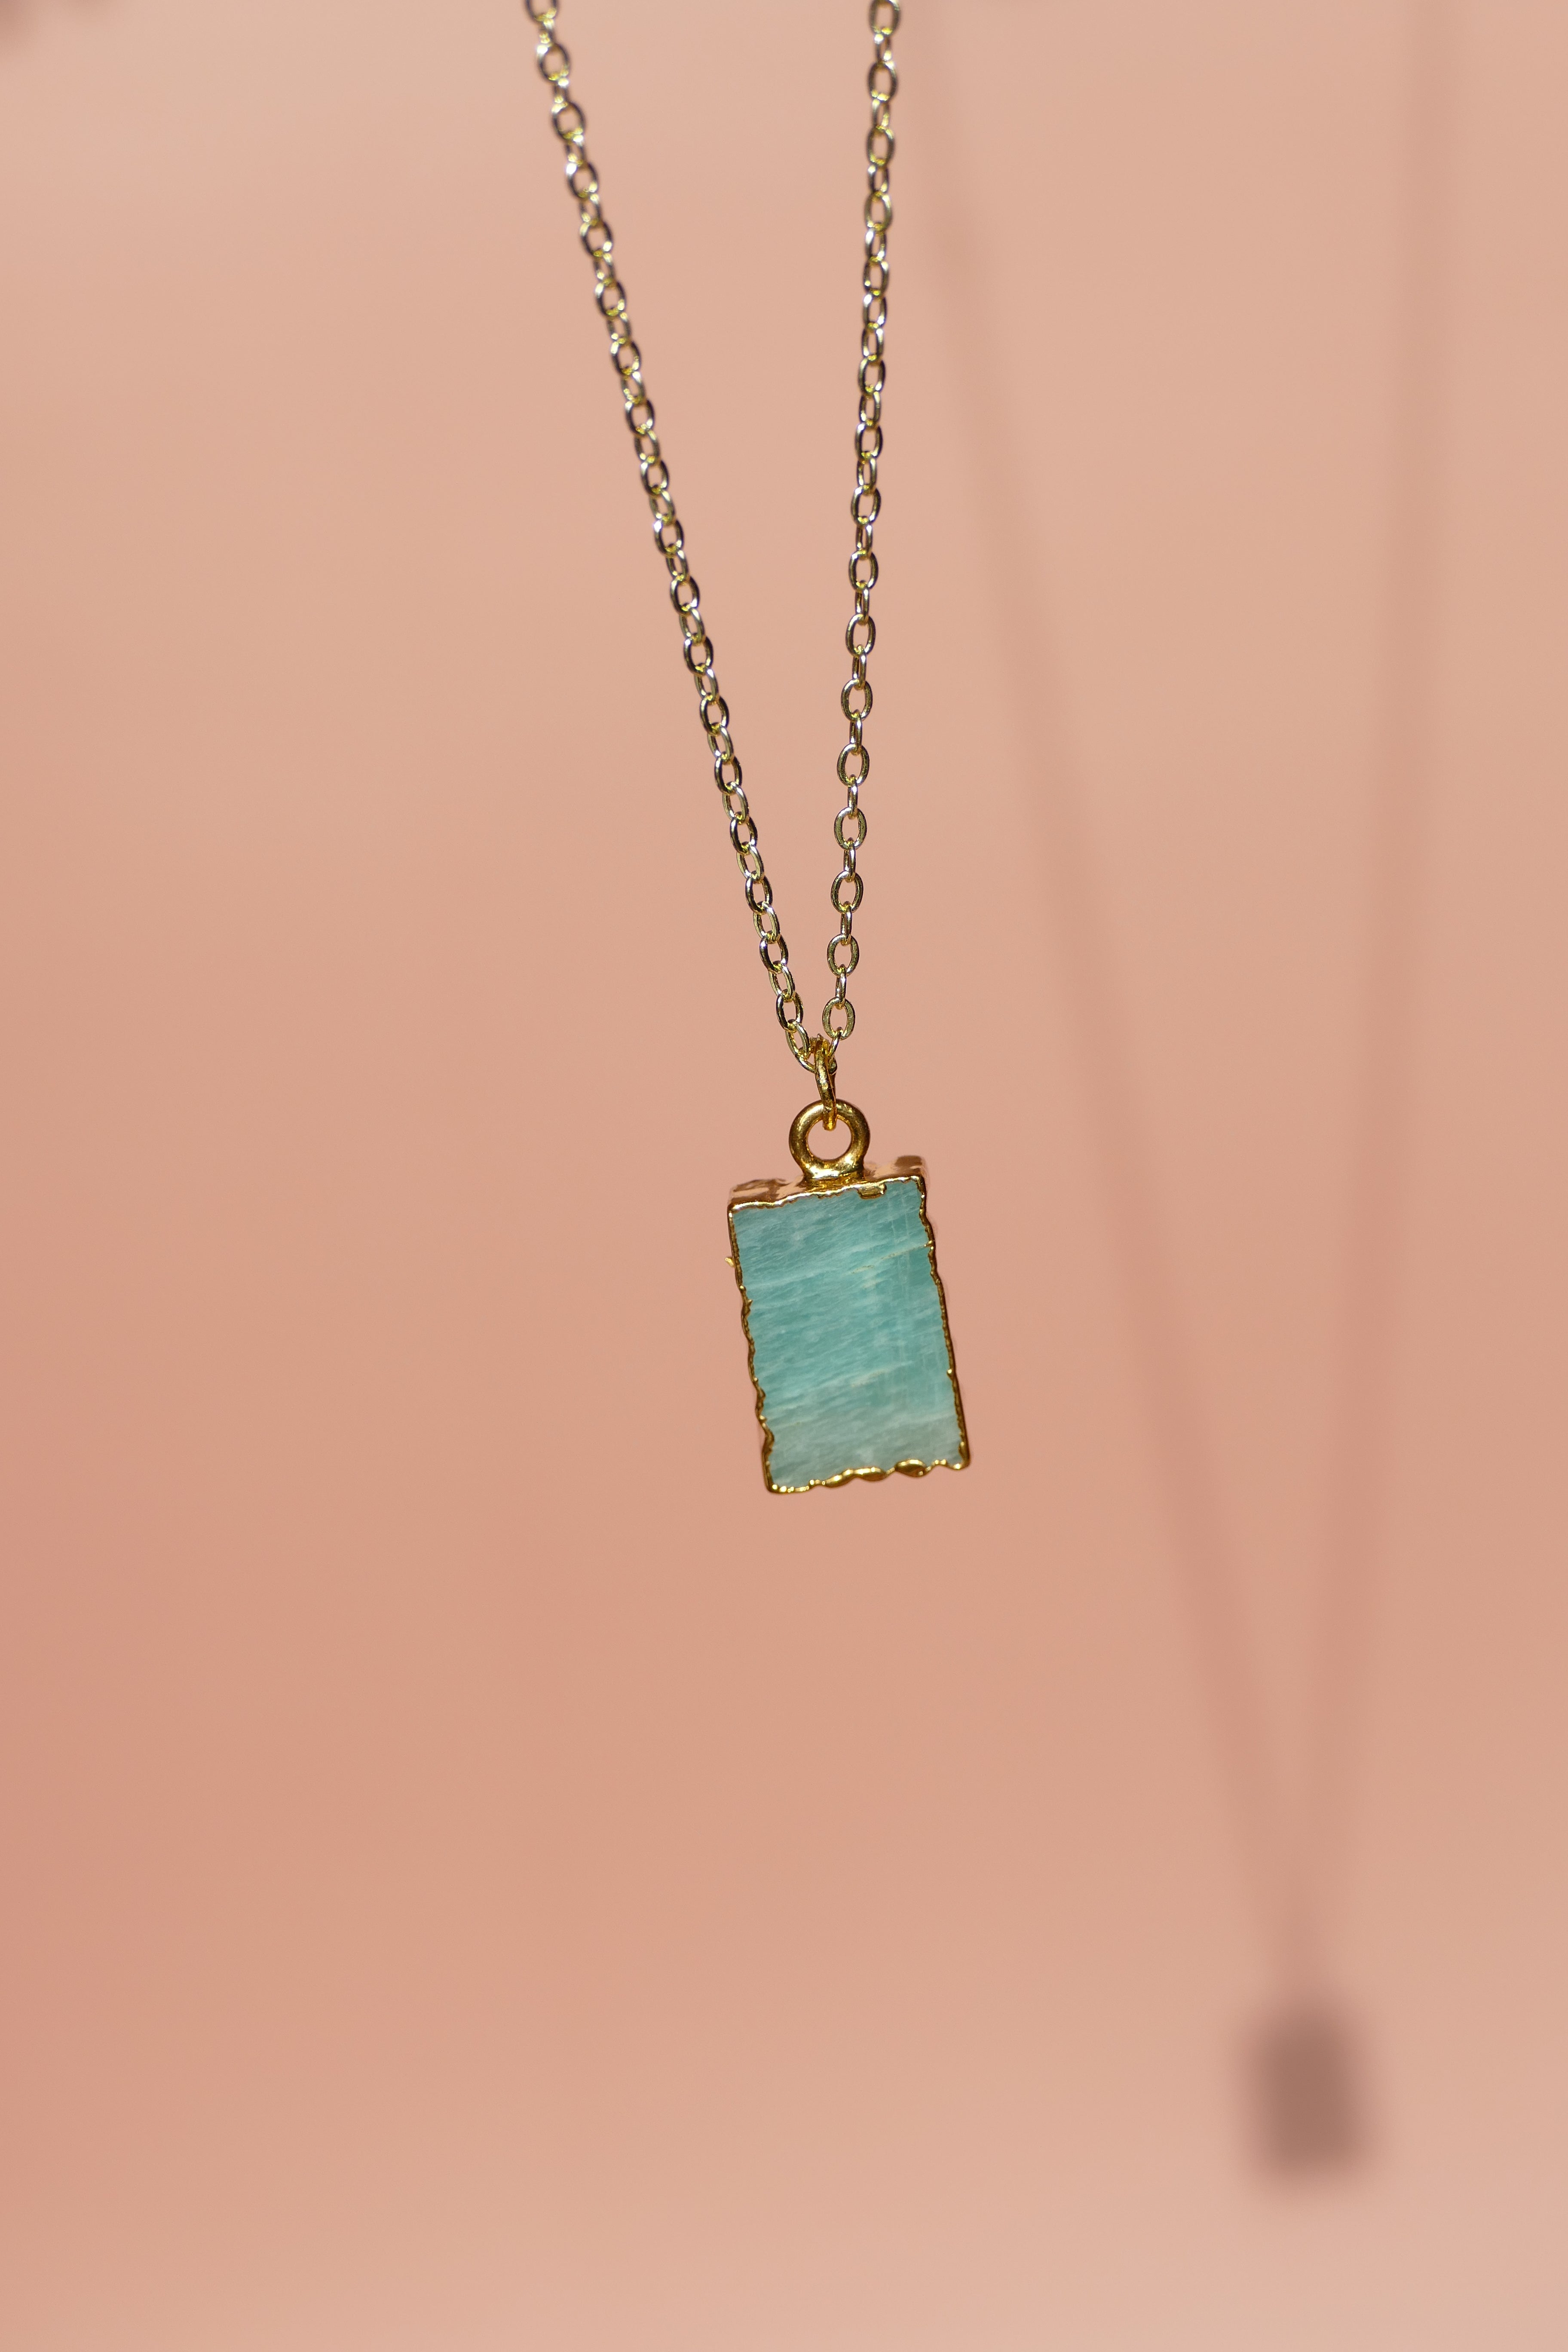 Crystal Charm Amazonite Diffusing Necklace - Put on Love Designs